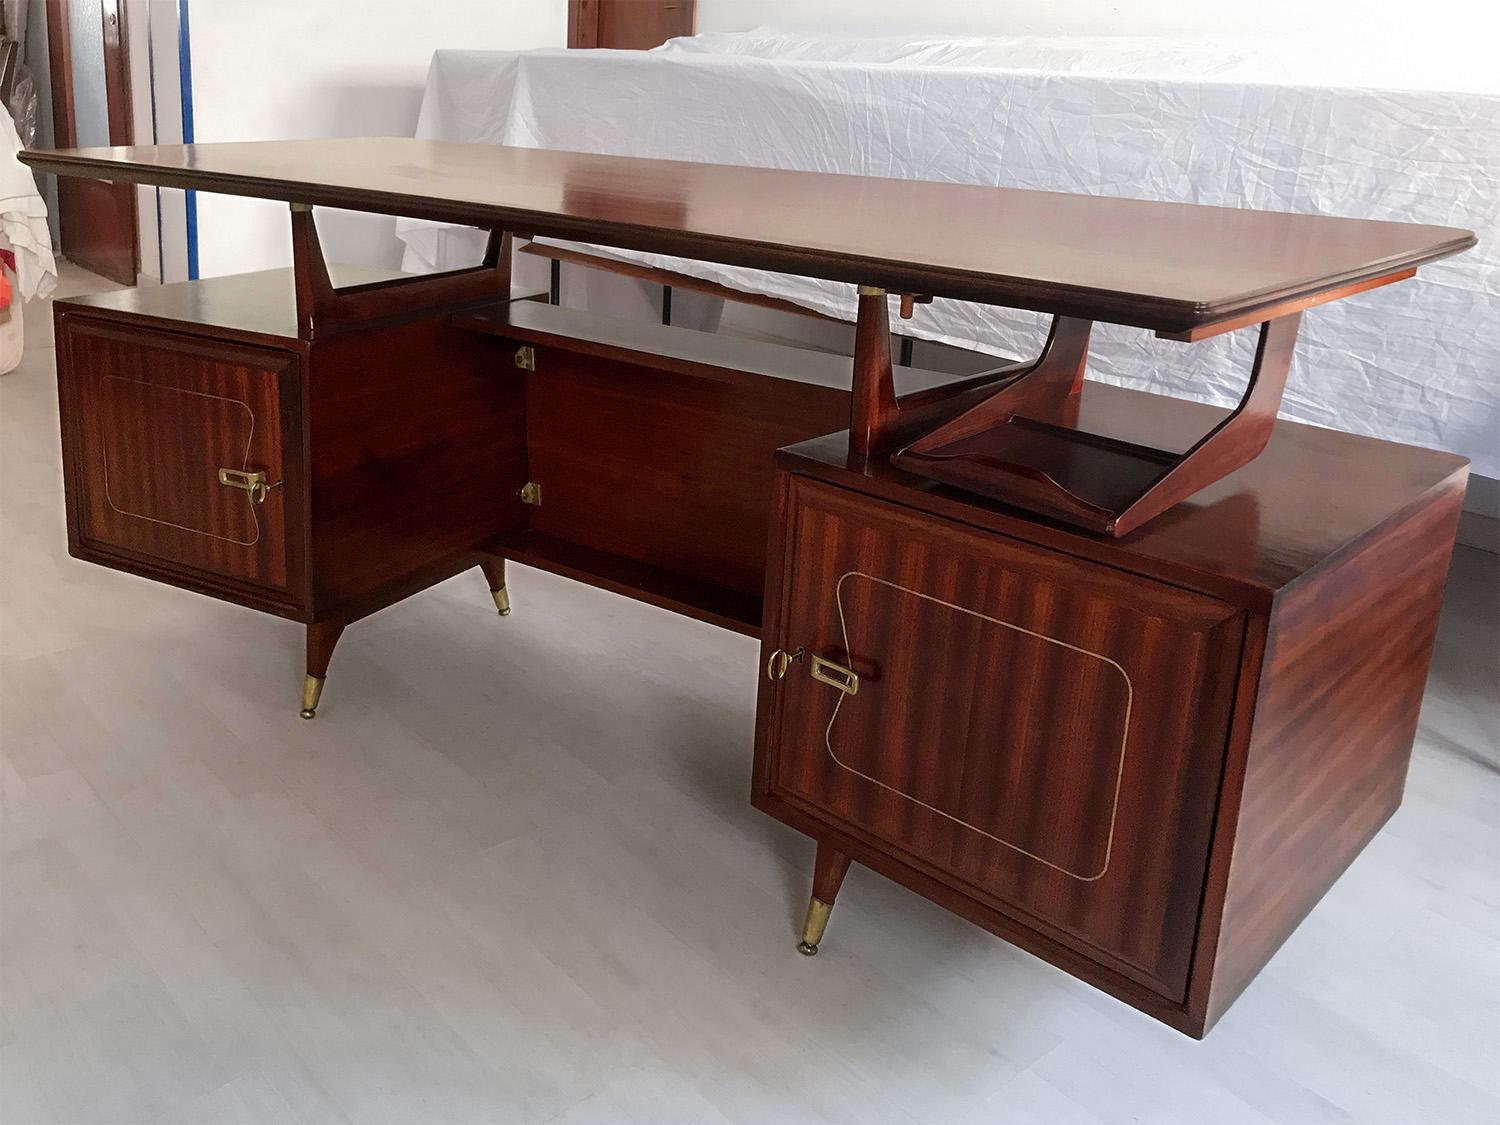 Amazing and unique design for this Italian office set of the 1950s, composed by the executive Desk with its Bookcase, both attributed to La Permanente Mobili Cantù.
The structures of both items are in mahogany veneer, finished with brass